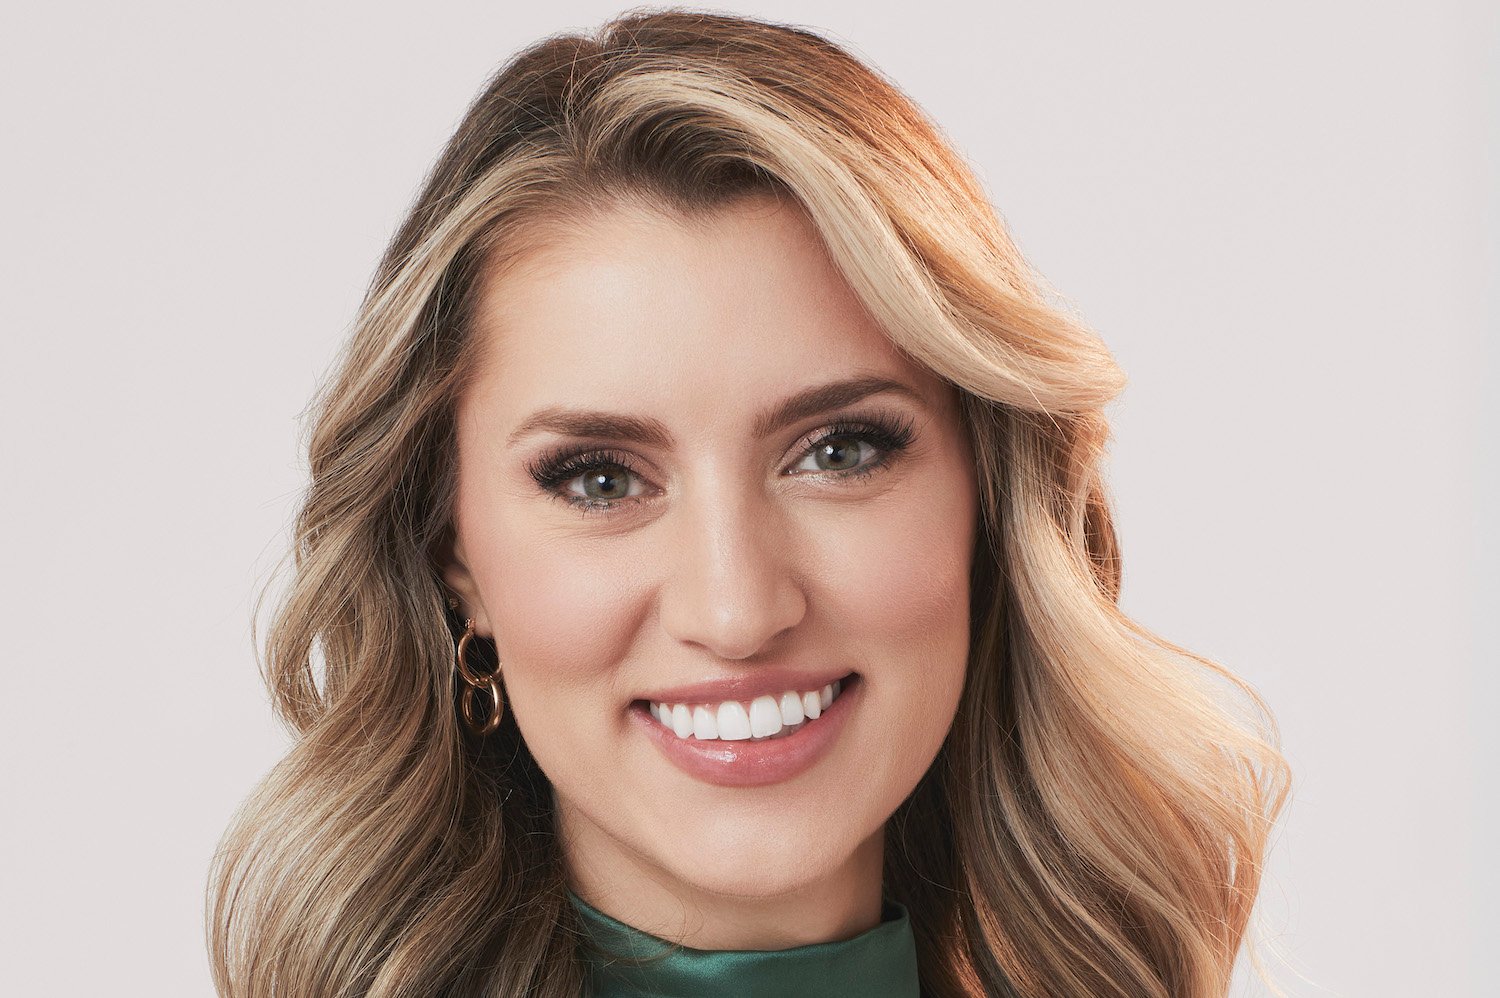 'The Bachelor' star Kaity Biggar in her official headshot for the series.